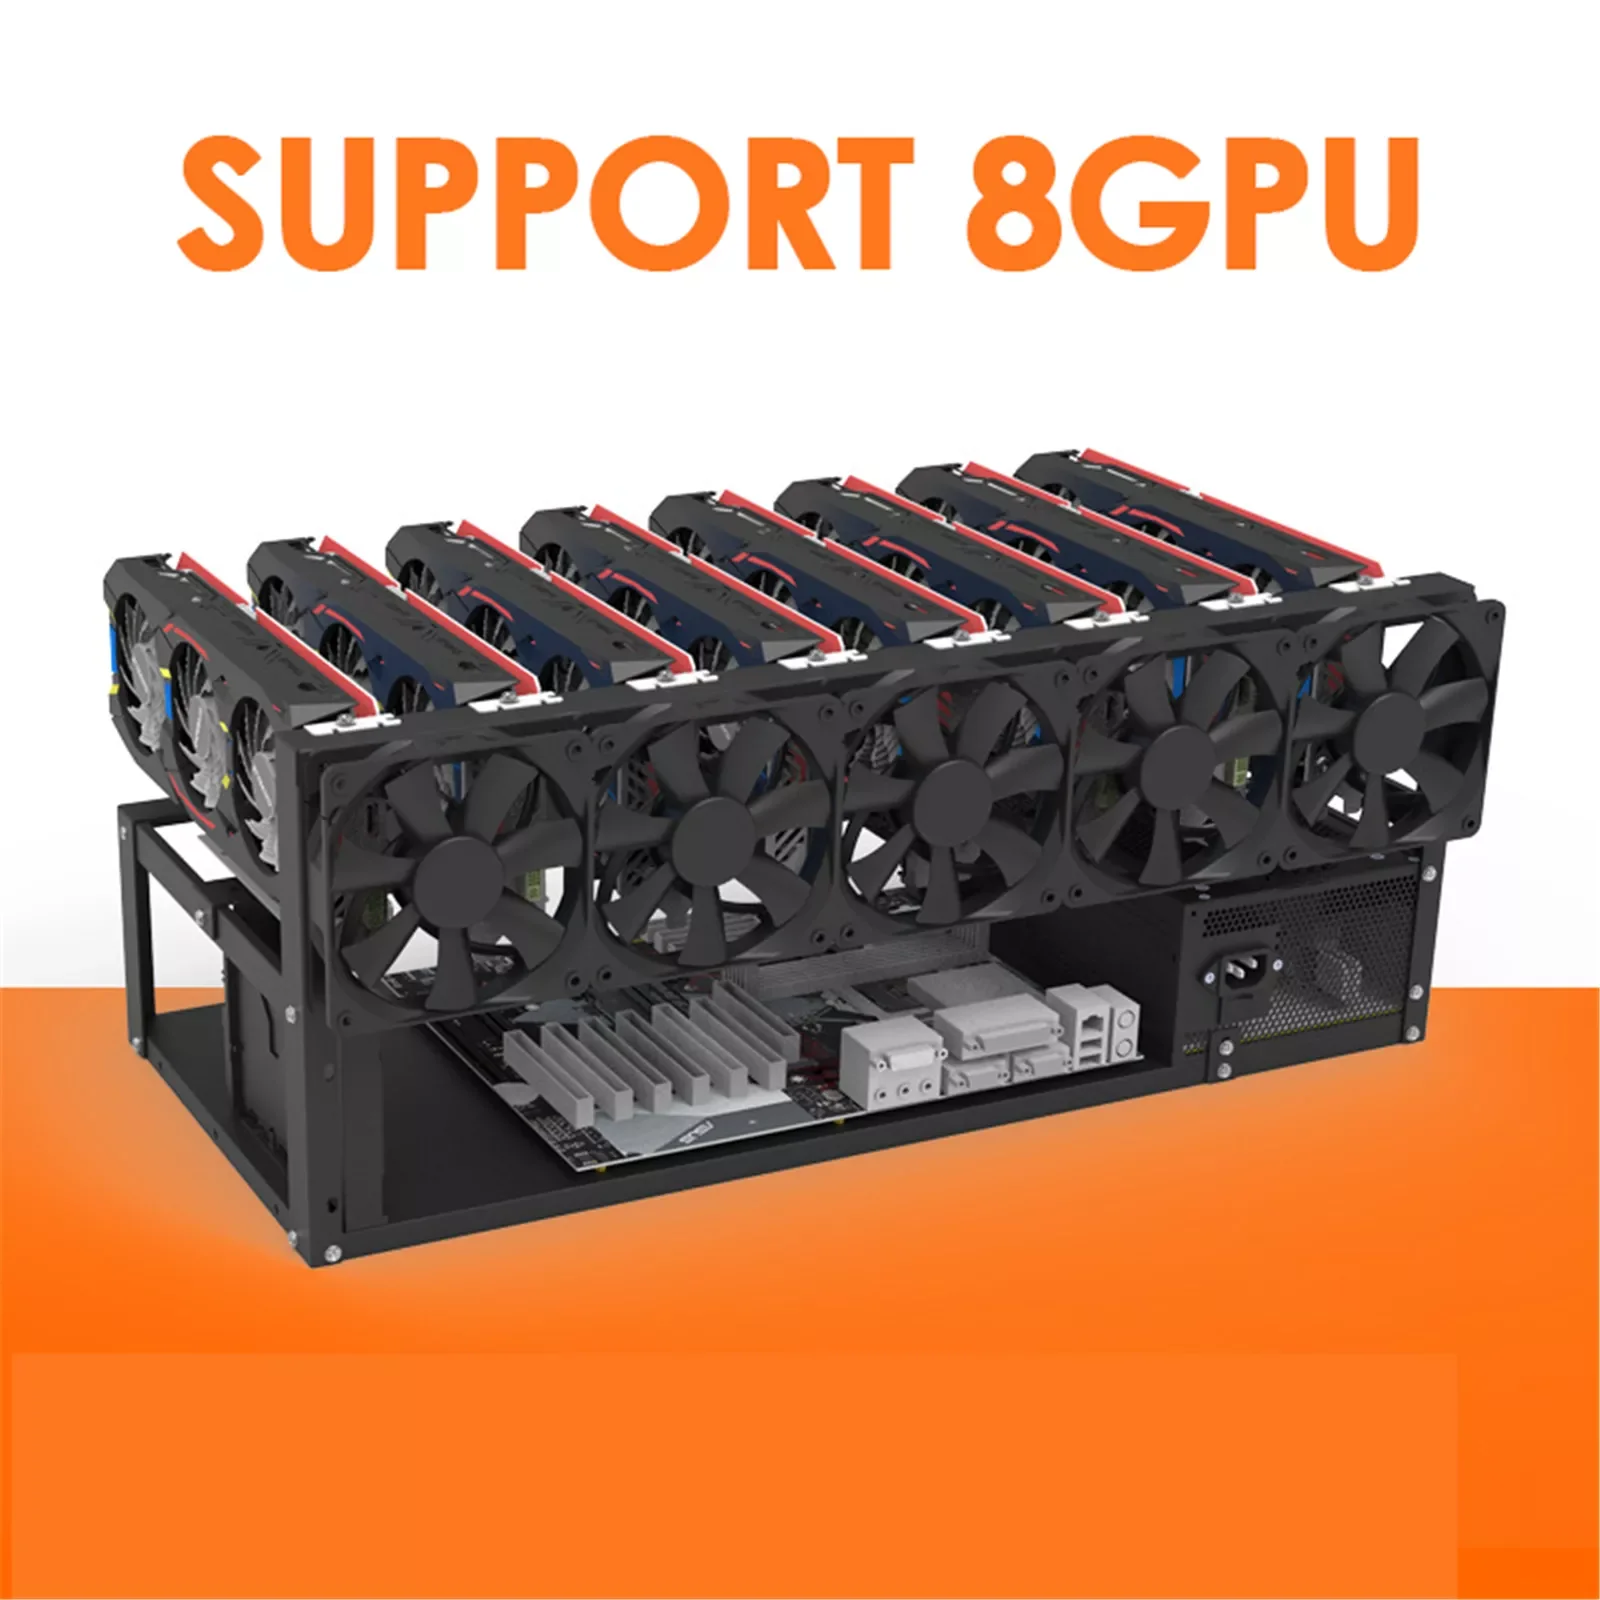 Open Mining Machine Frame Mining Rig Frame Case Graphics Card Bracket Holds 8GPU Mining for Crypto Coin Currency Bitcoin Mining enlarge